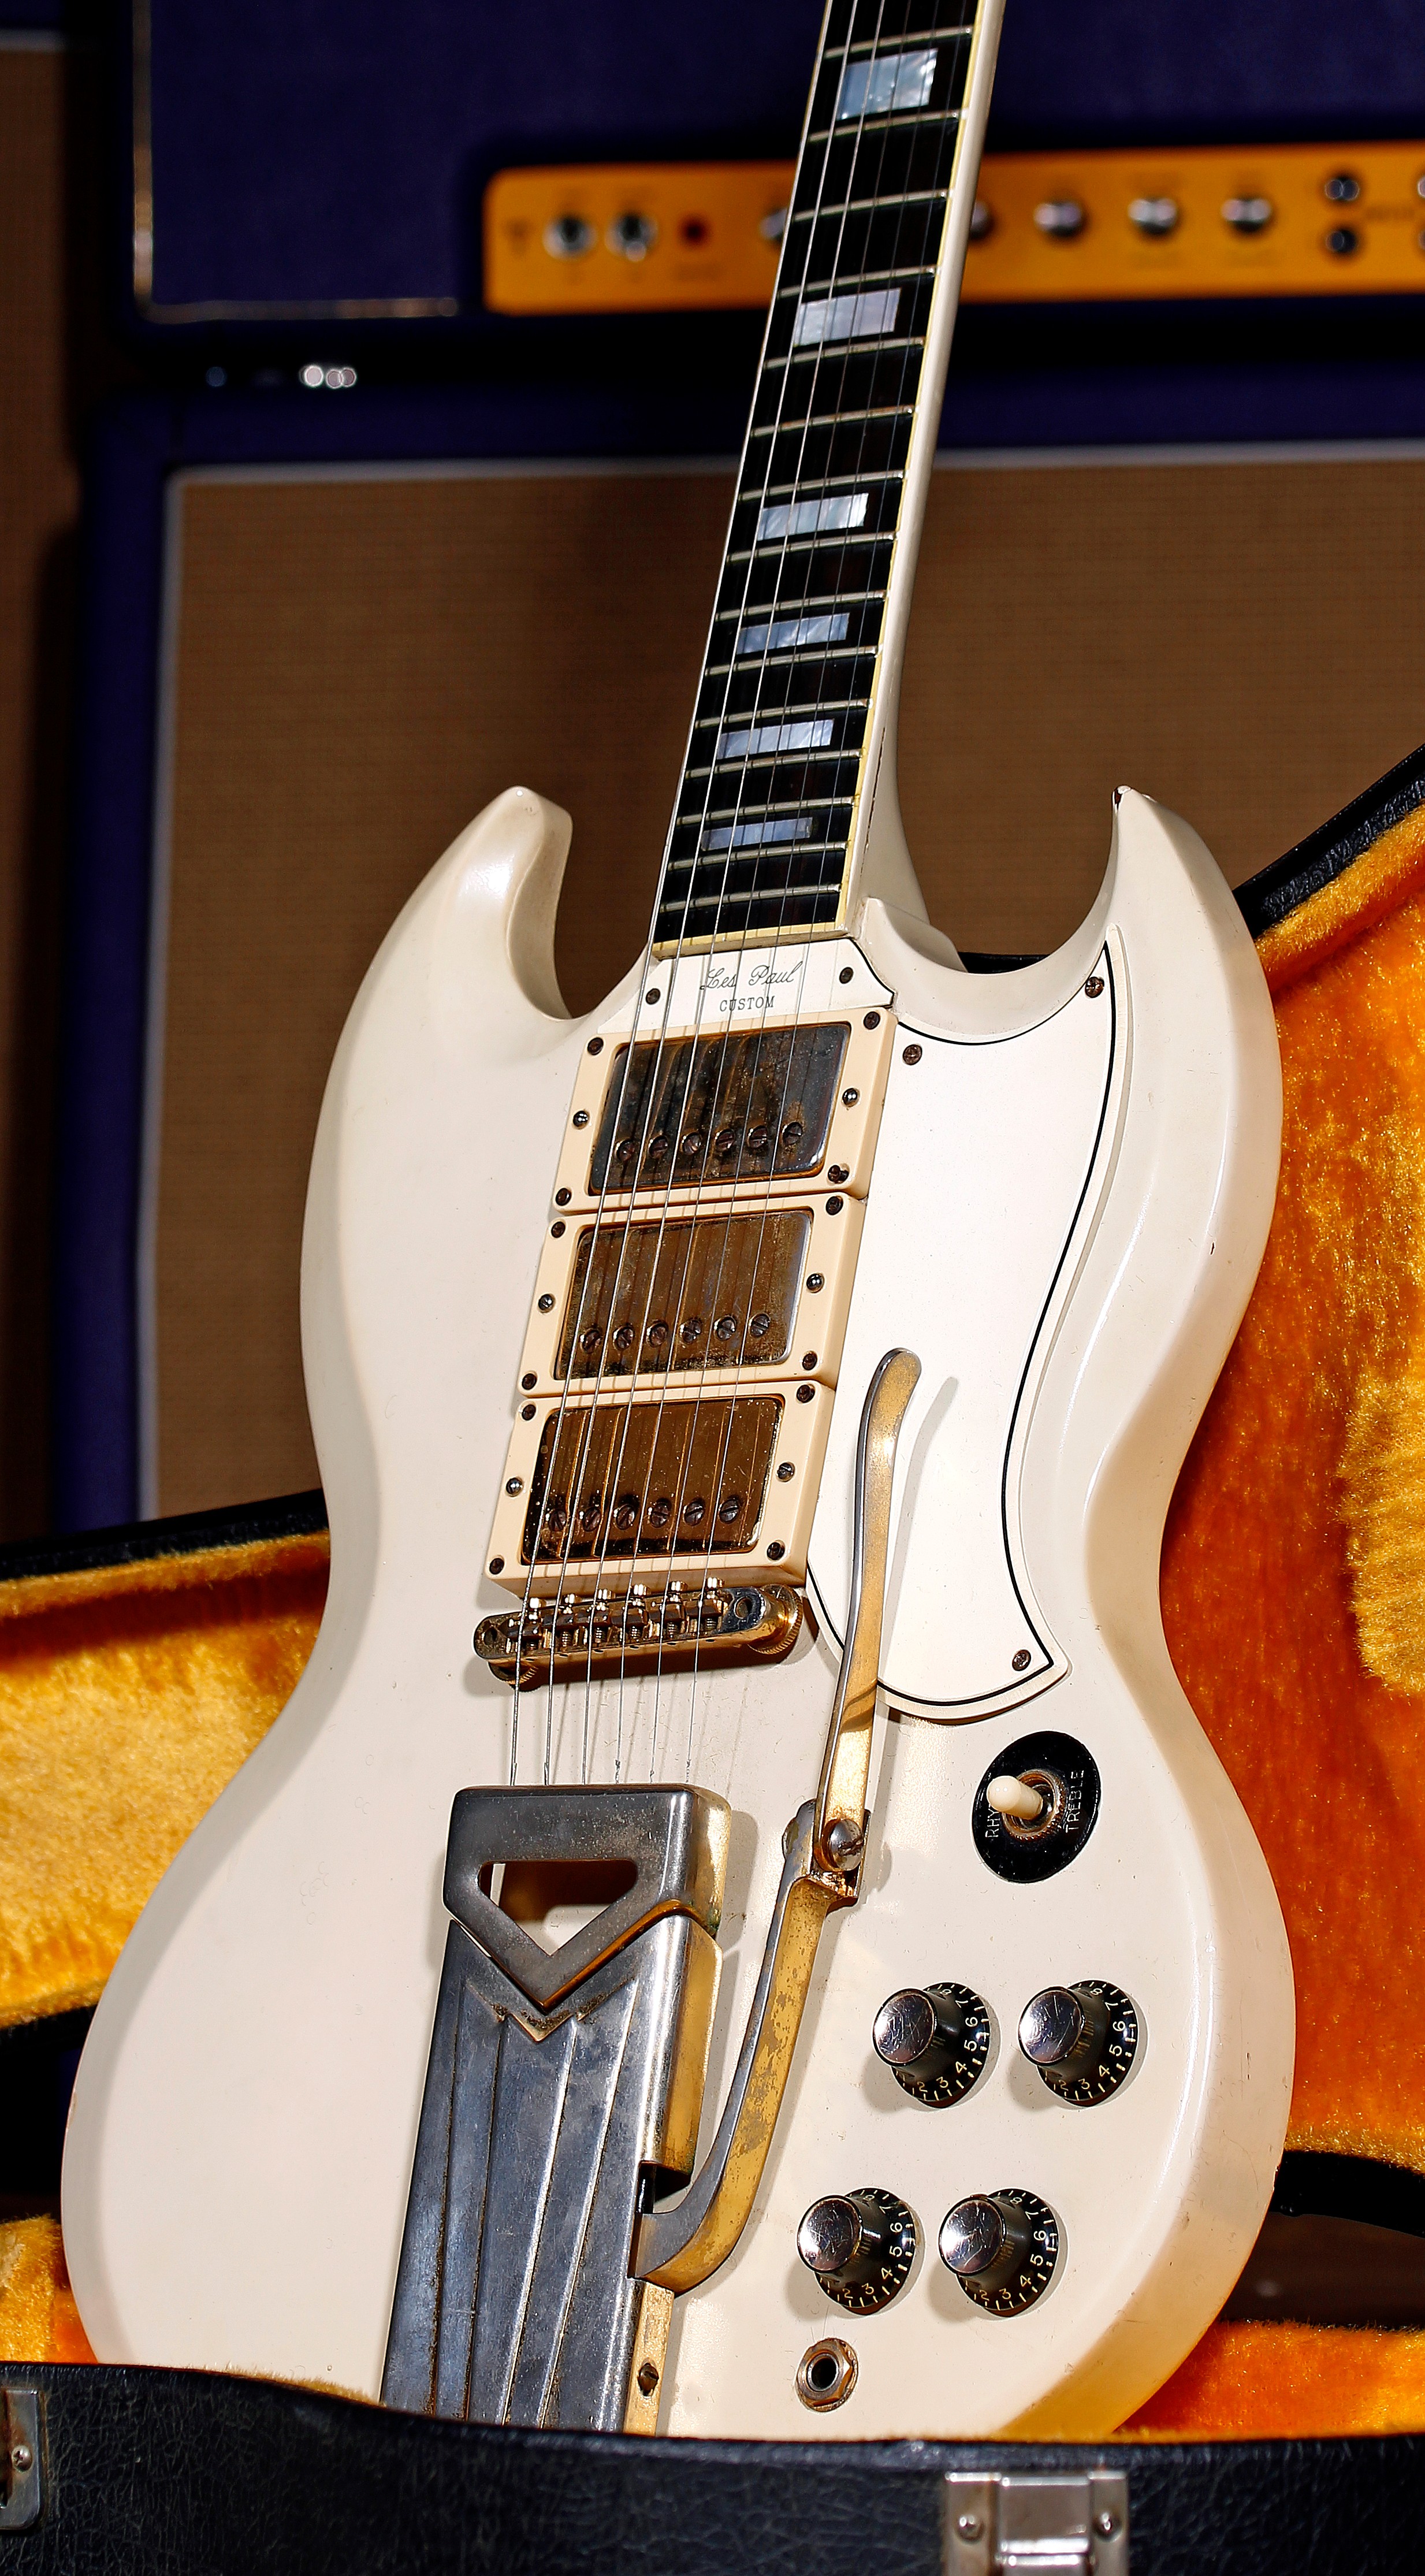 1961 Gibson Les Paul Custom (SG body) electric guitar, made in USA; Body: white refinish, various